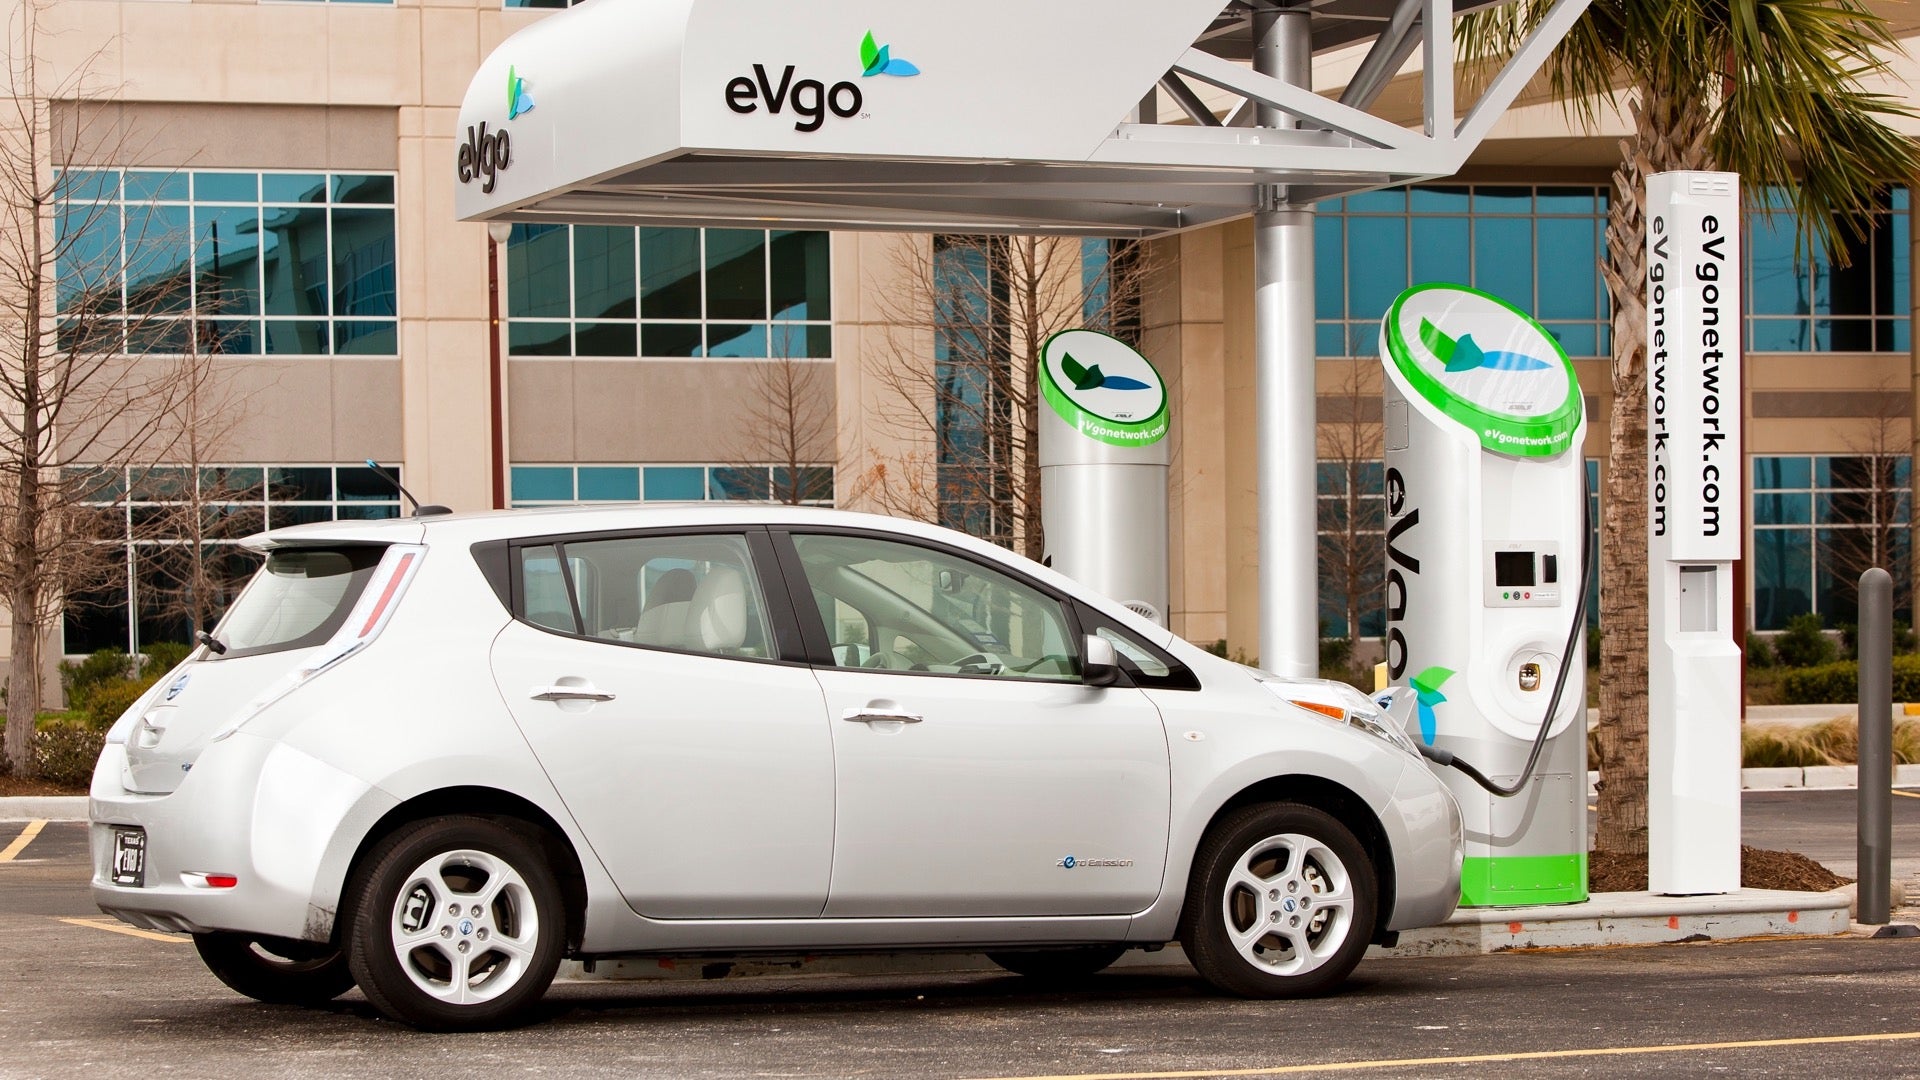 Nissan Linking Boston and Washington, D.C. With Electric Car Charging Stations